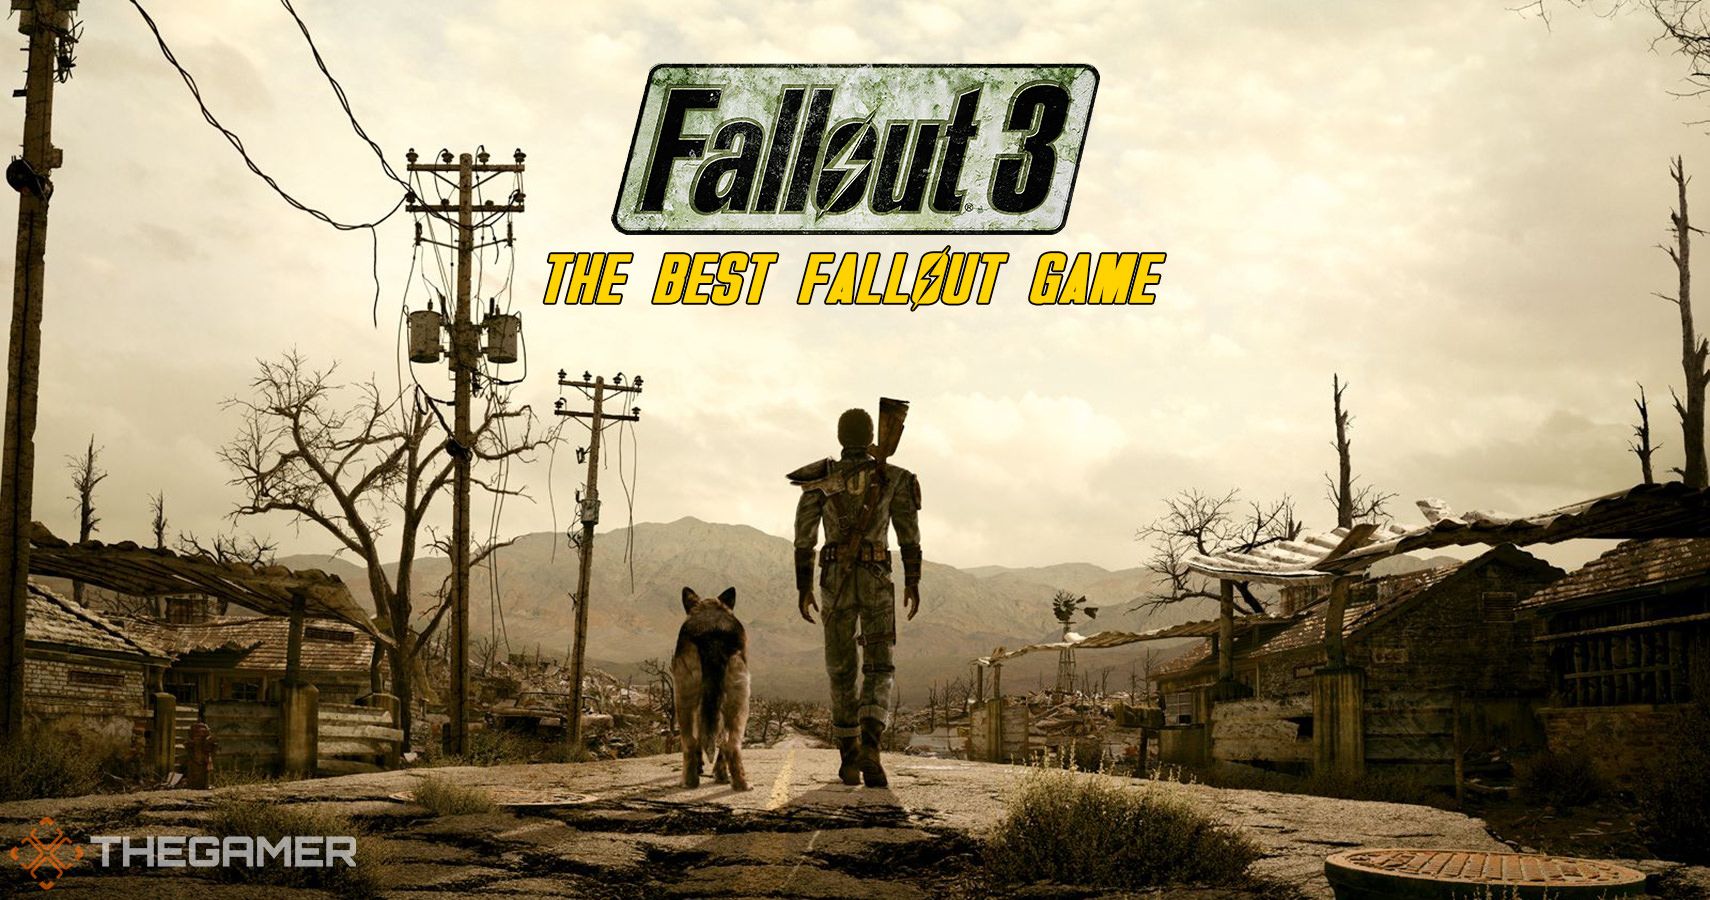 Fallout 3's opening is the best in the series